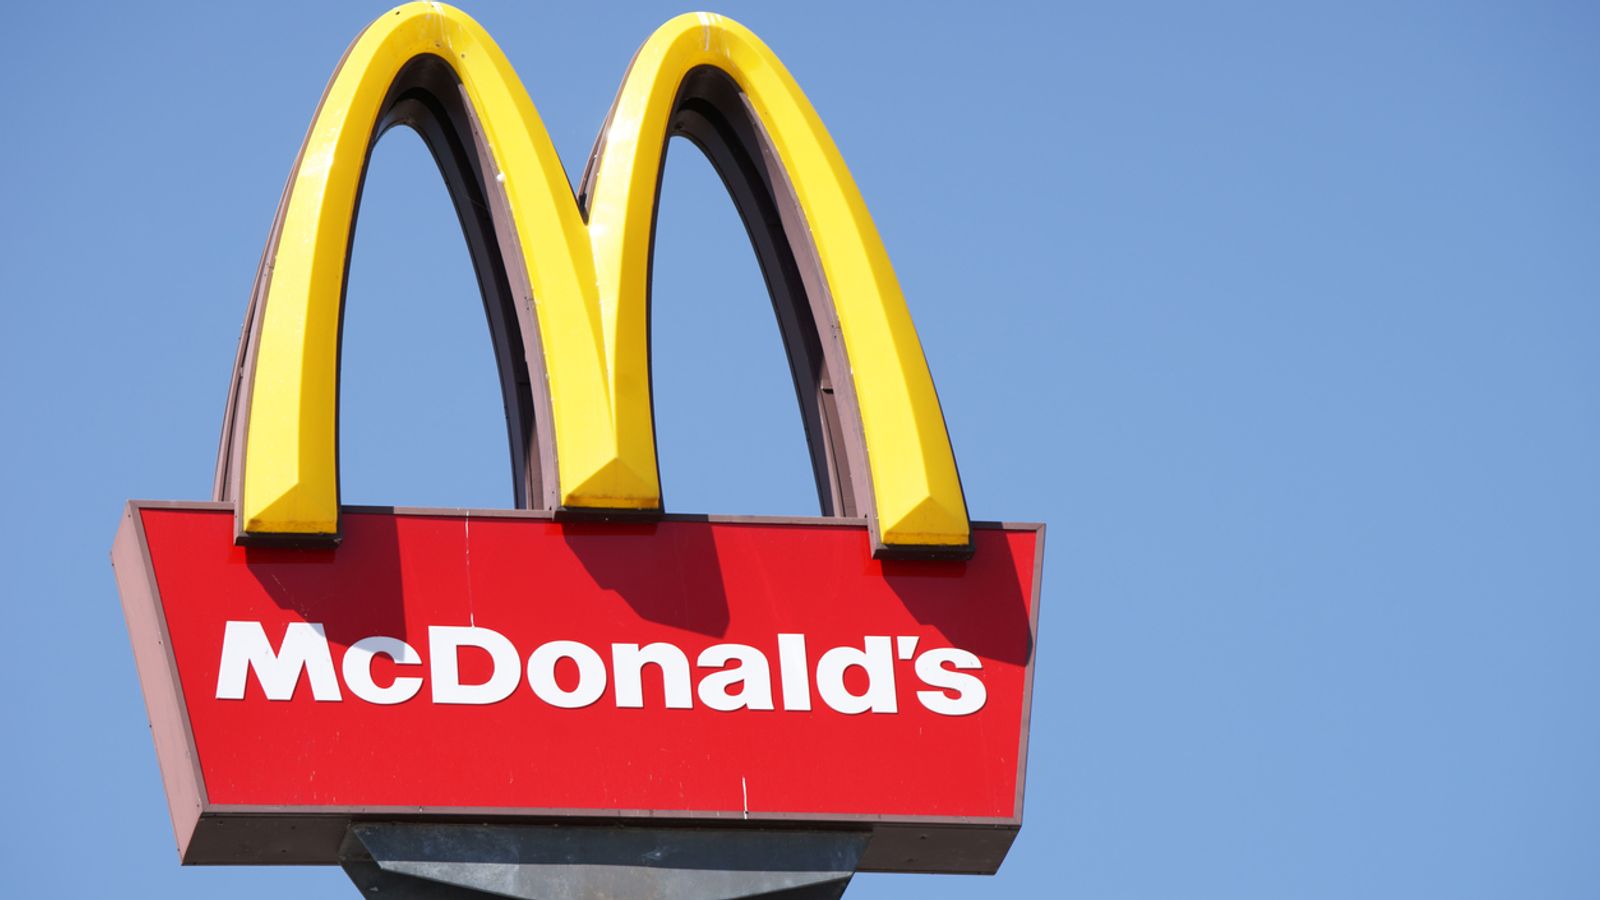 Two 10-year-olds found working unpaid shifts until 2am at US McDonald's restaurant